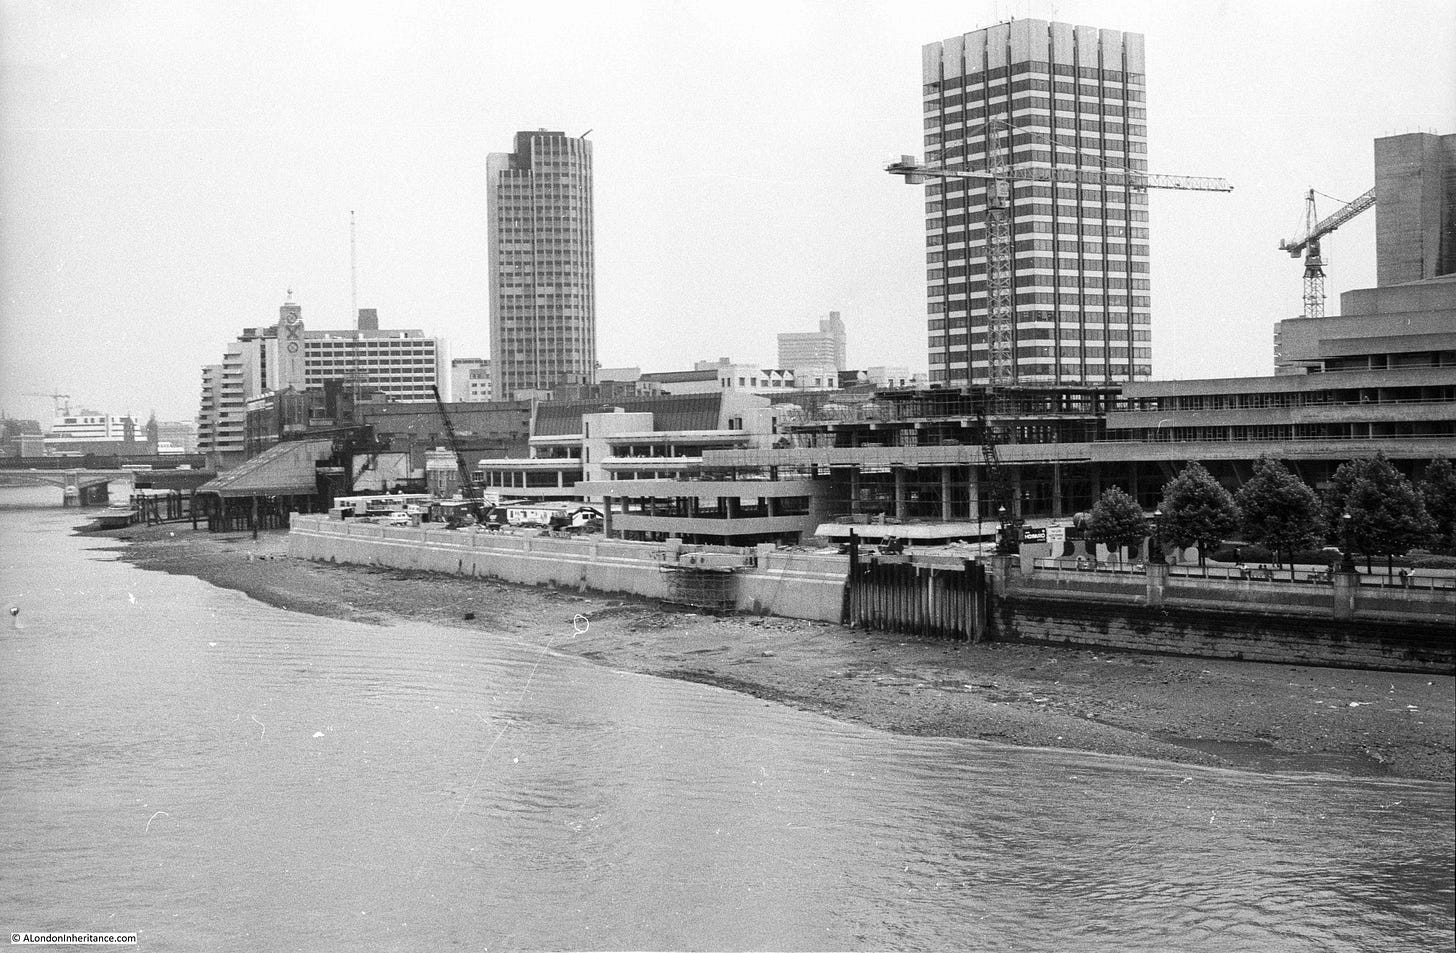 Walking the South Bank in 1980 and 2019 - A London Inheritance